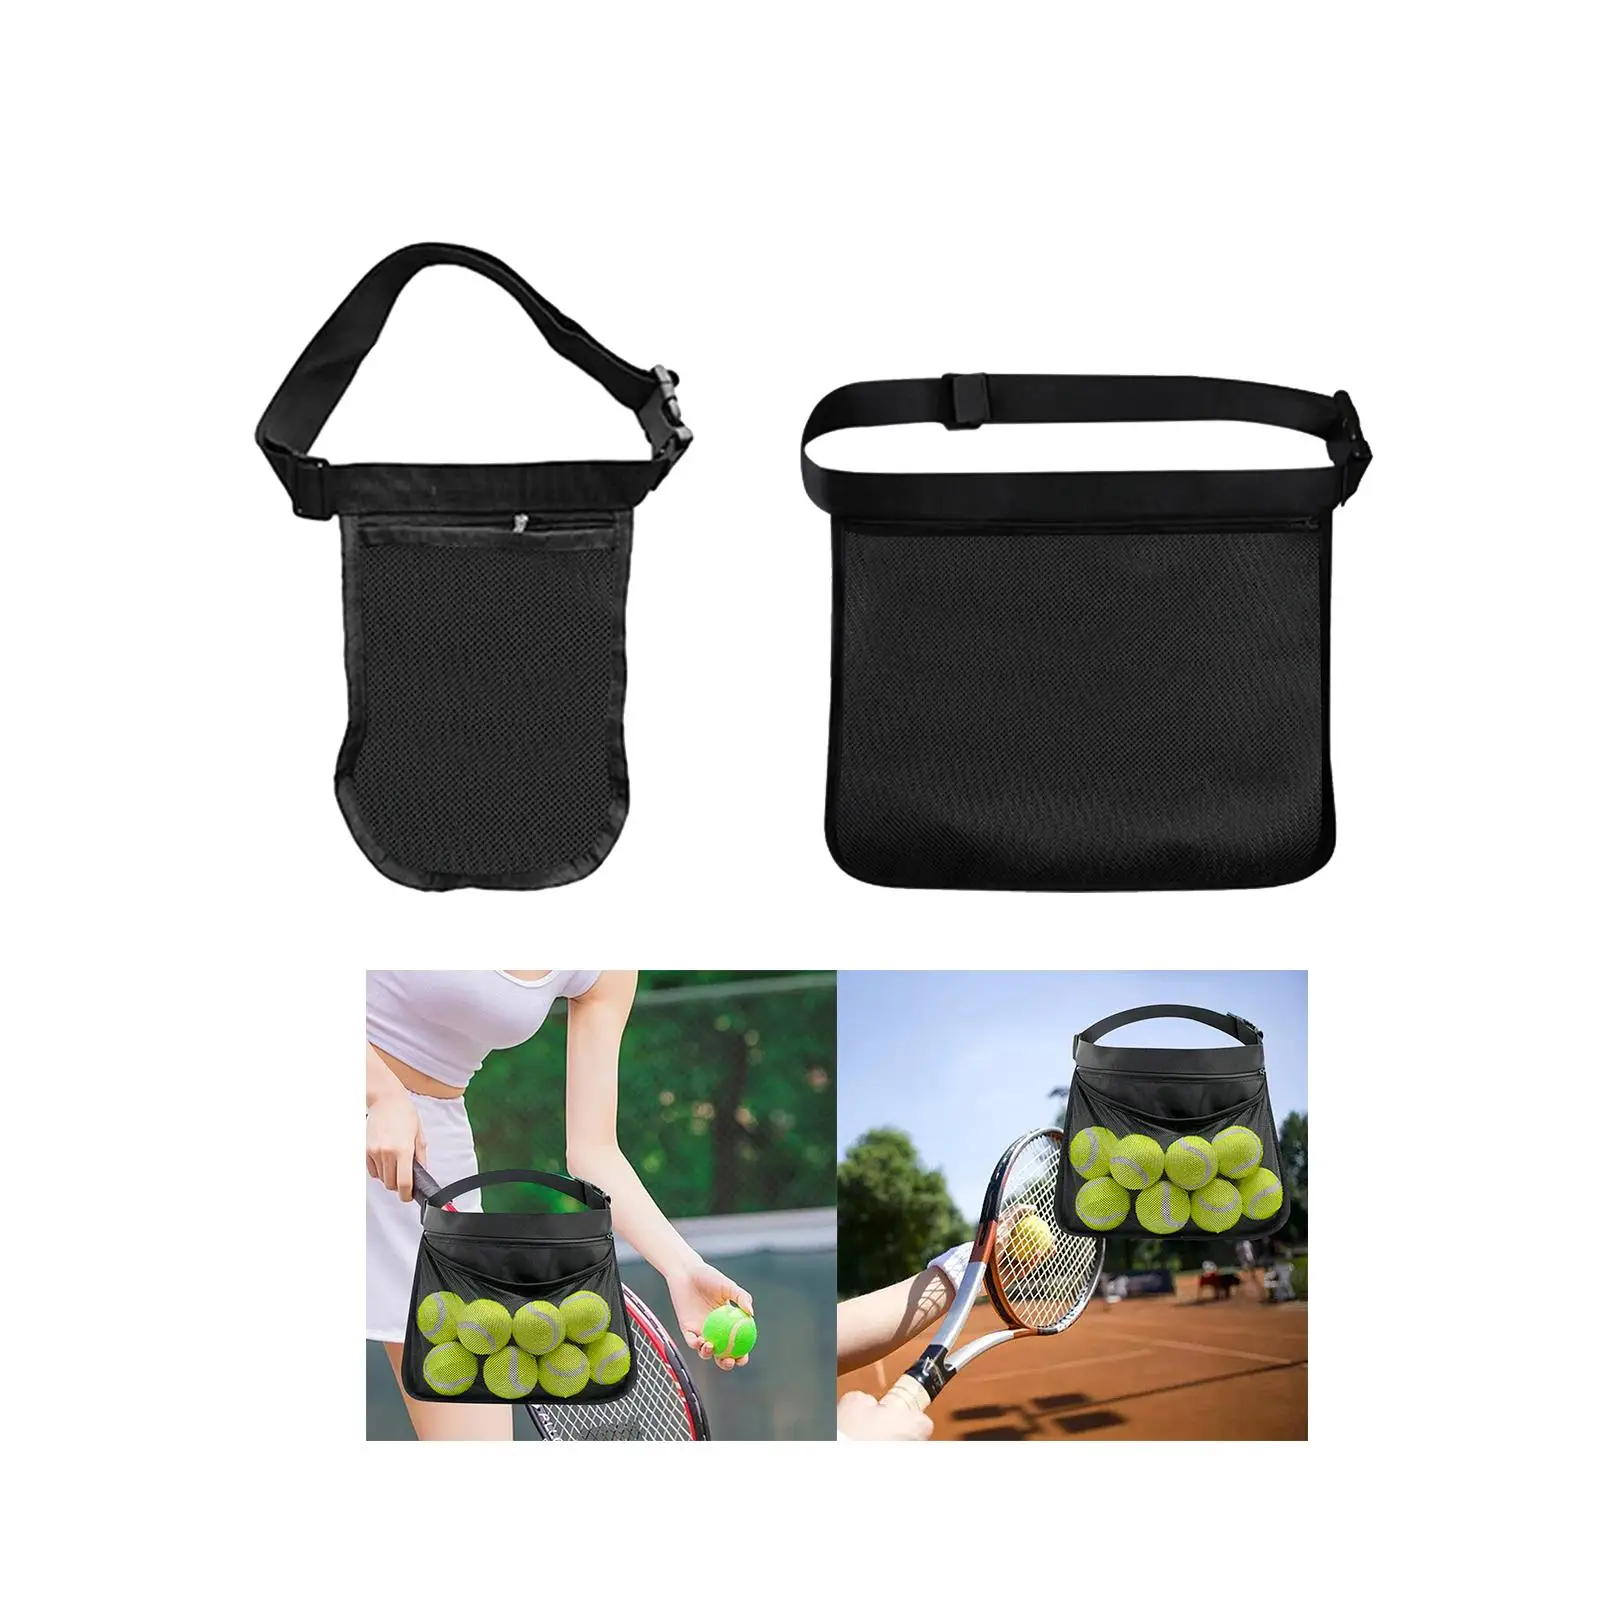 Black Tennis Ball Holder Carrier Gadgets Sports Accessory Tennis Ball Holder Mesh Storage Bag for Storing Balls and Phones